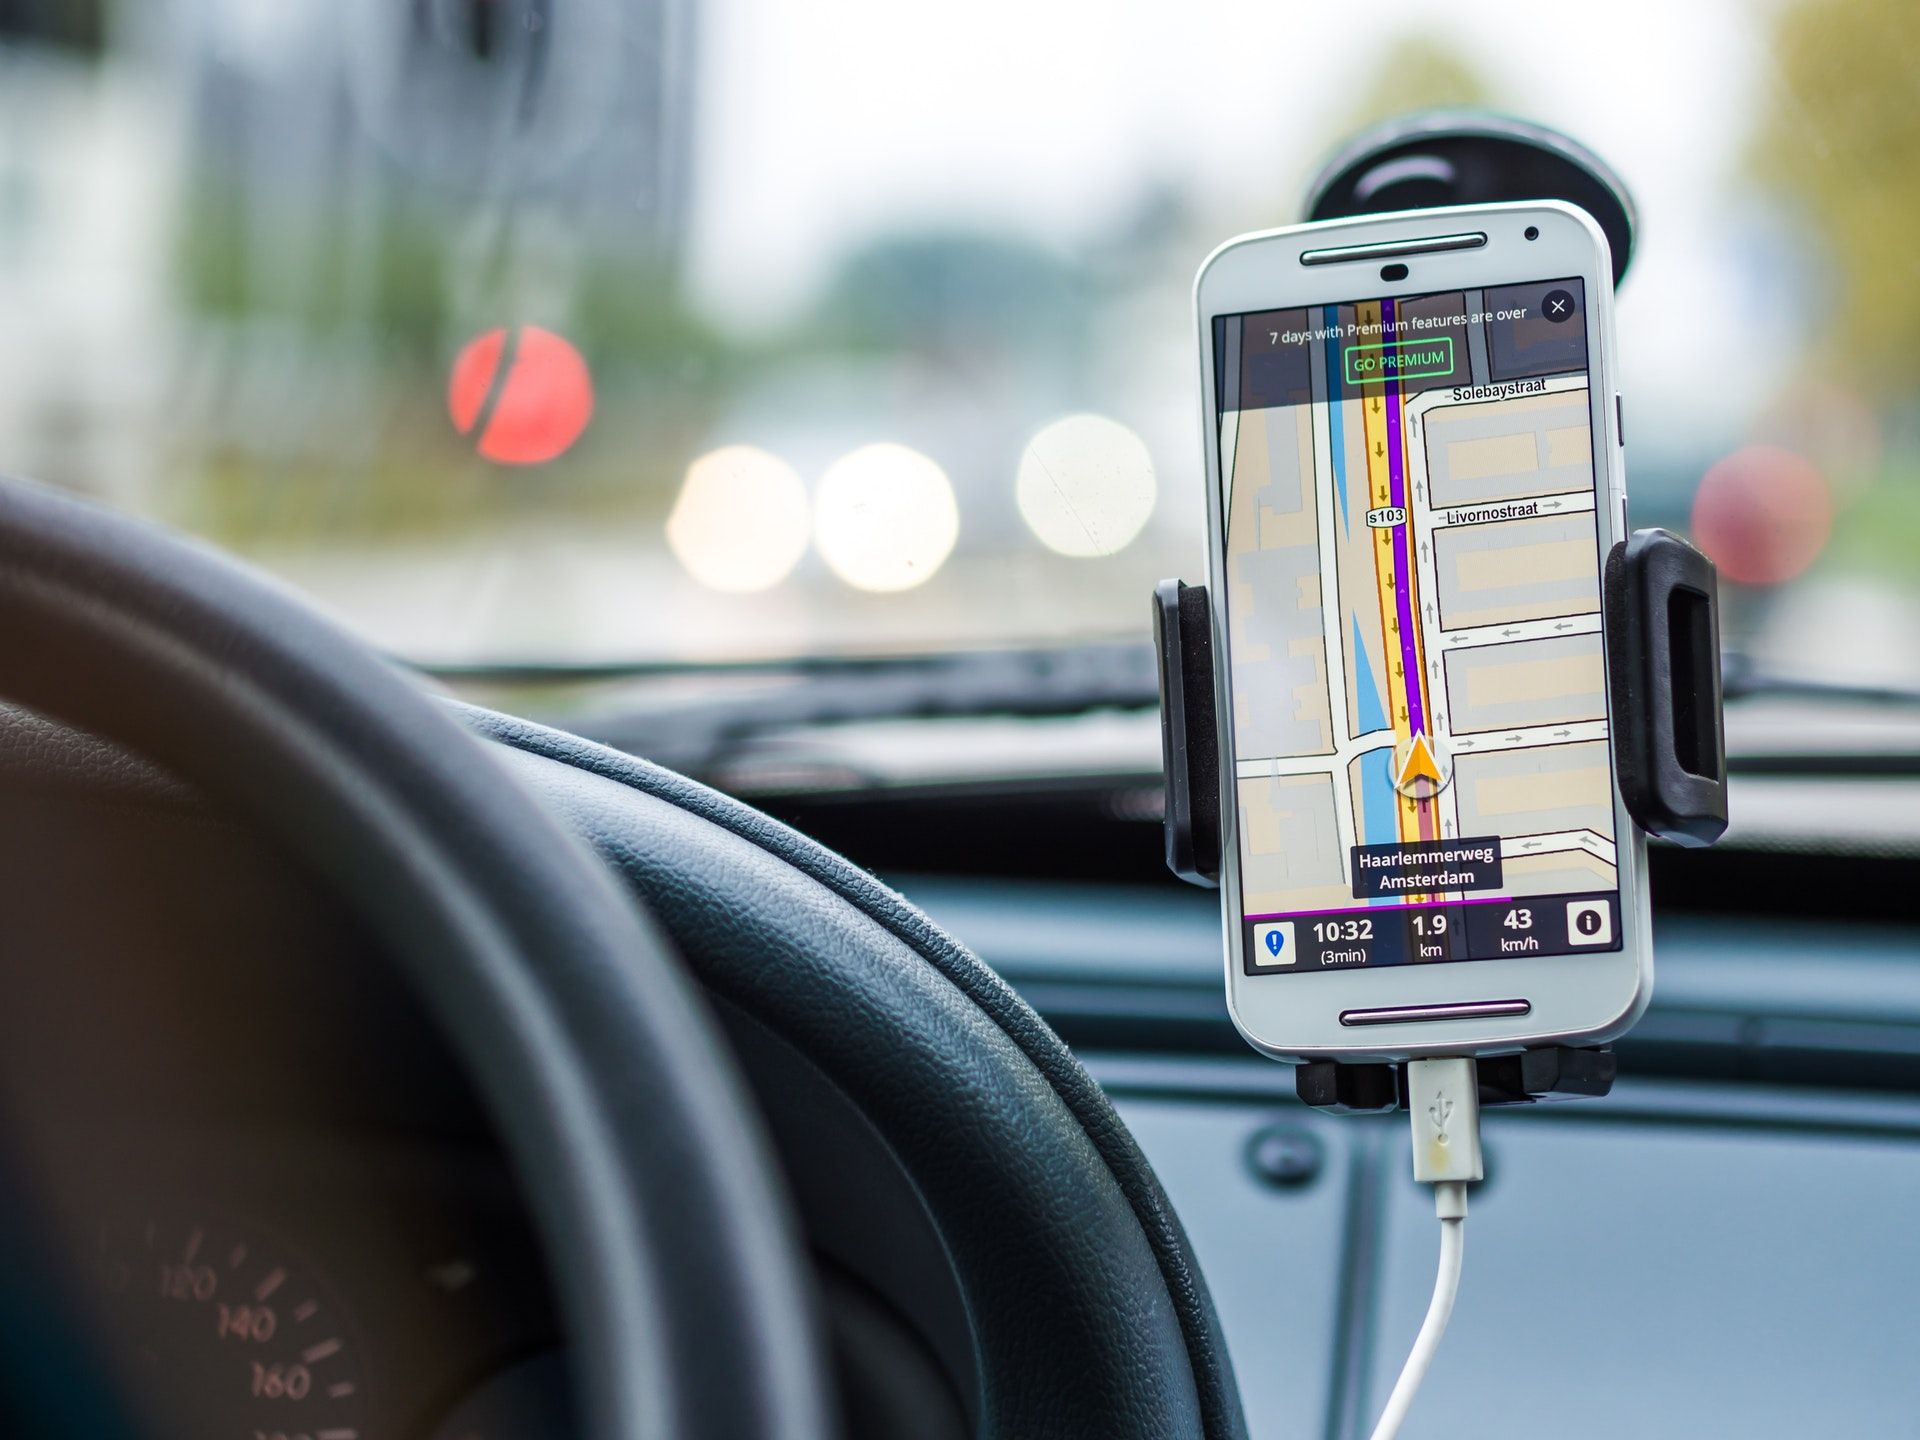 smartphone mounted with charging cable showing navigation in car